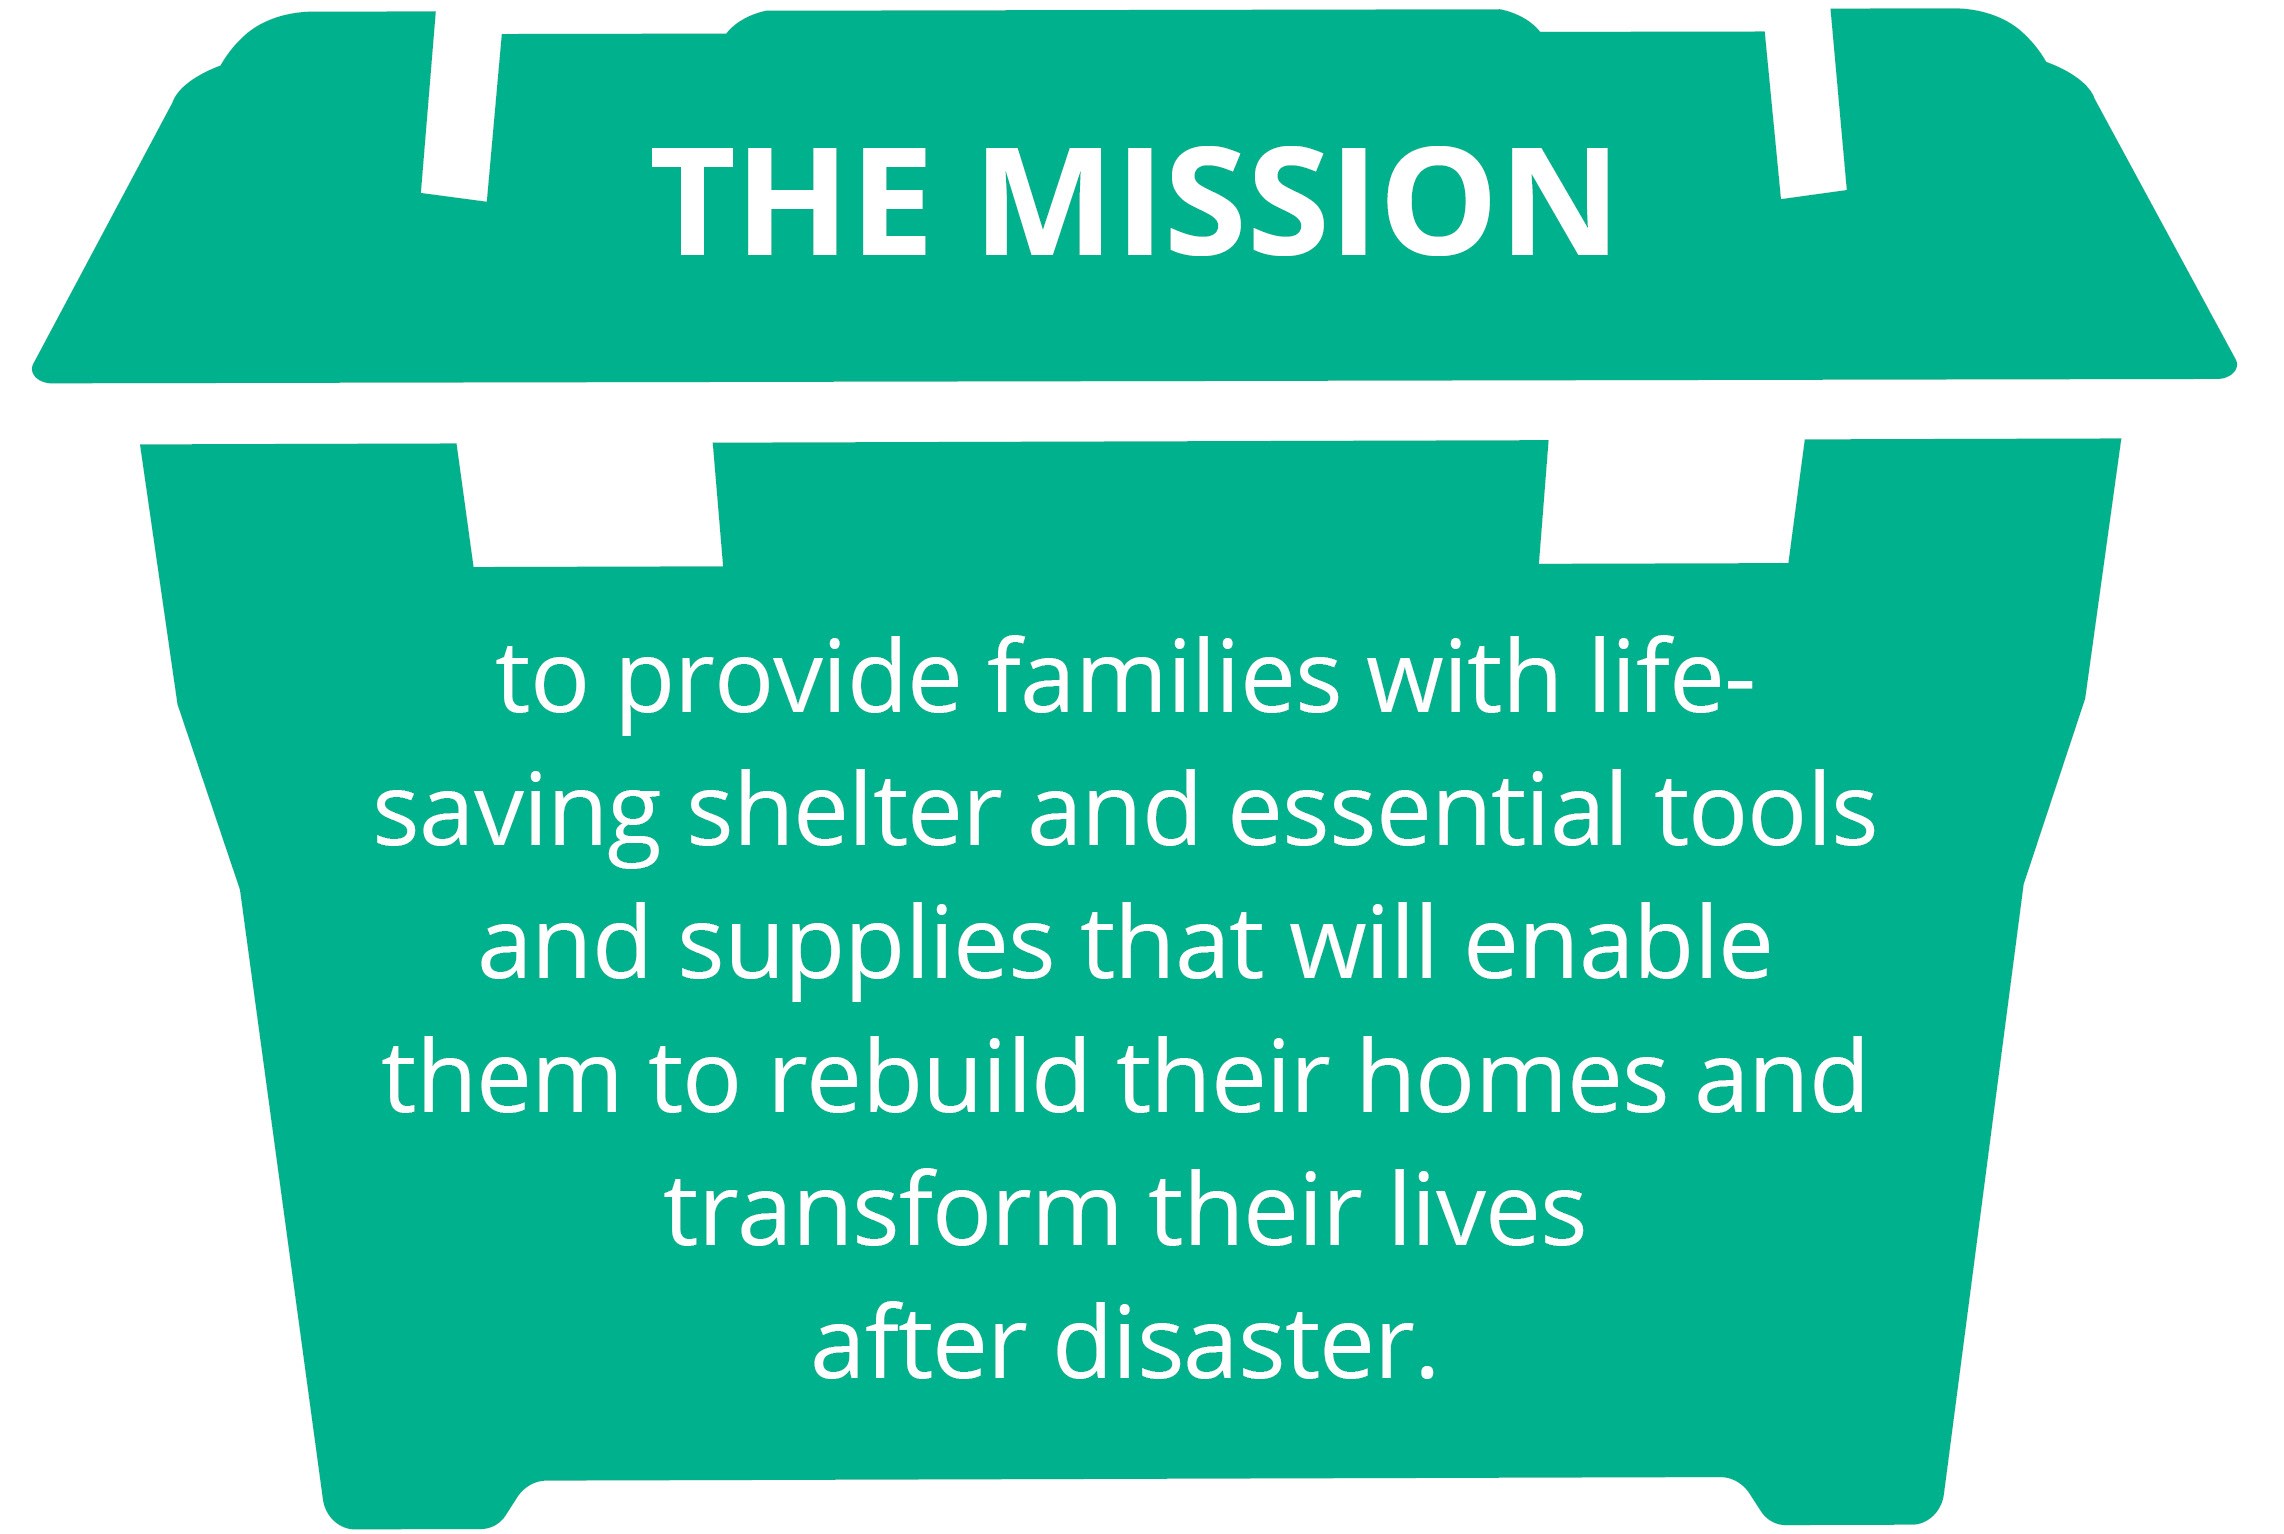 Our mission is to provide families with life-saving shelter and essential tools and supplies that will enable them to rebuild their homes and transform their lives after disaster